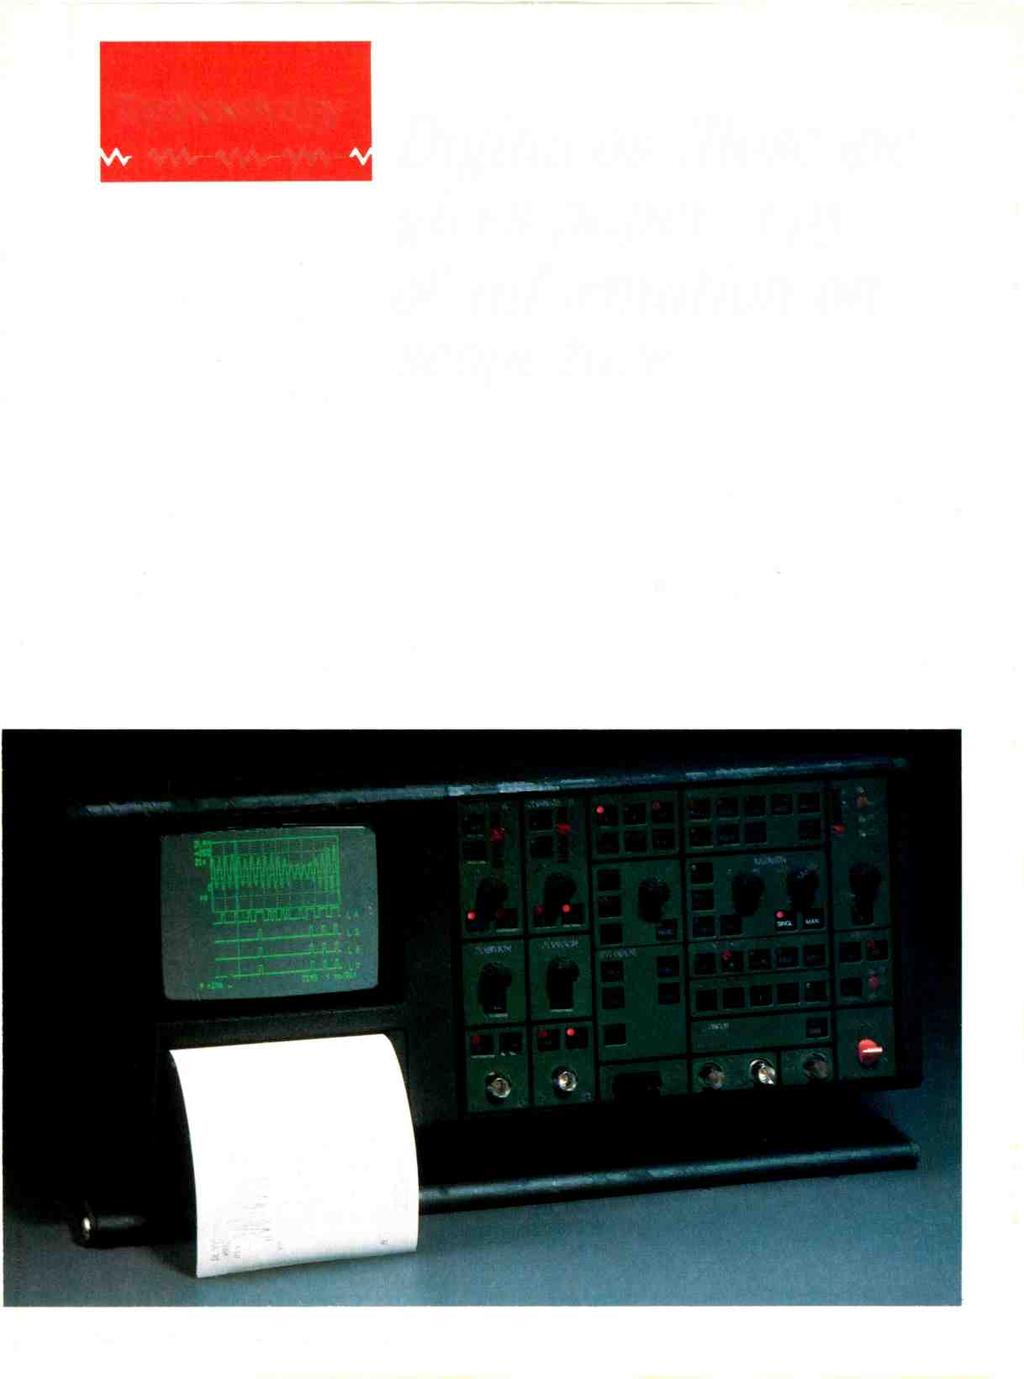 Technology Oscilloscopes have undergone considerable change and improvement in the last few years.